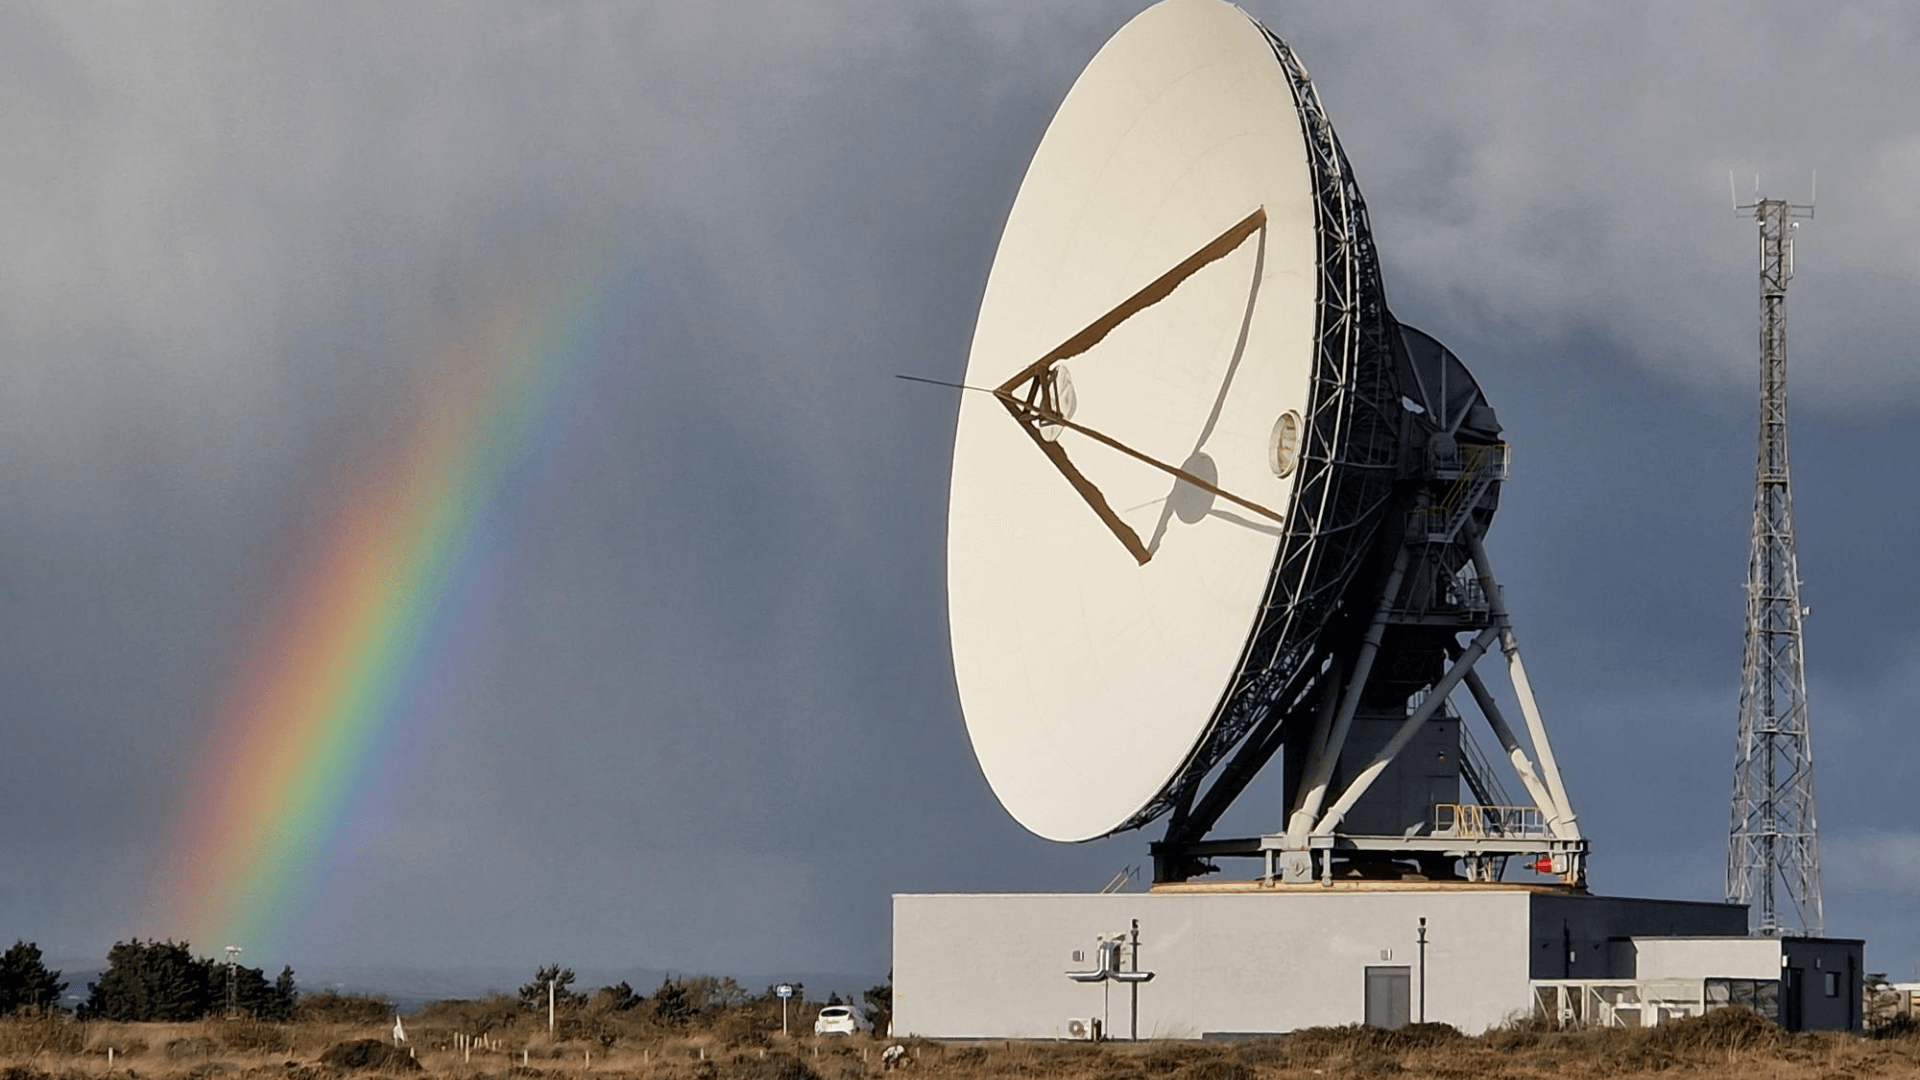 32m GHY-6 antenna, used for lunar and deep space communications, is pointing towards its target, with a rainbow next to it.